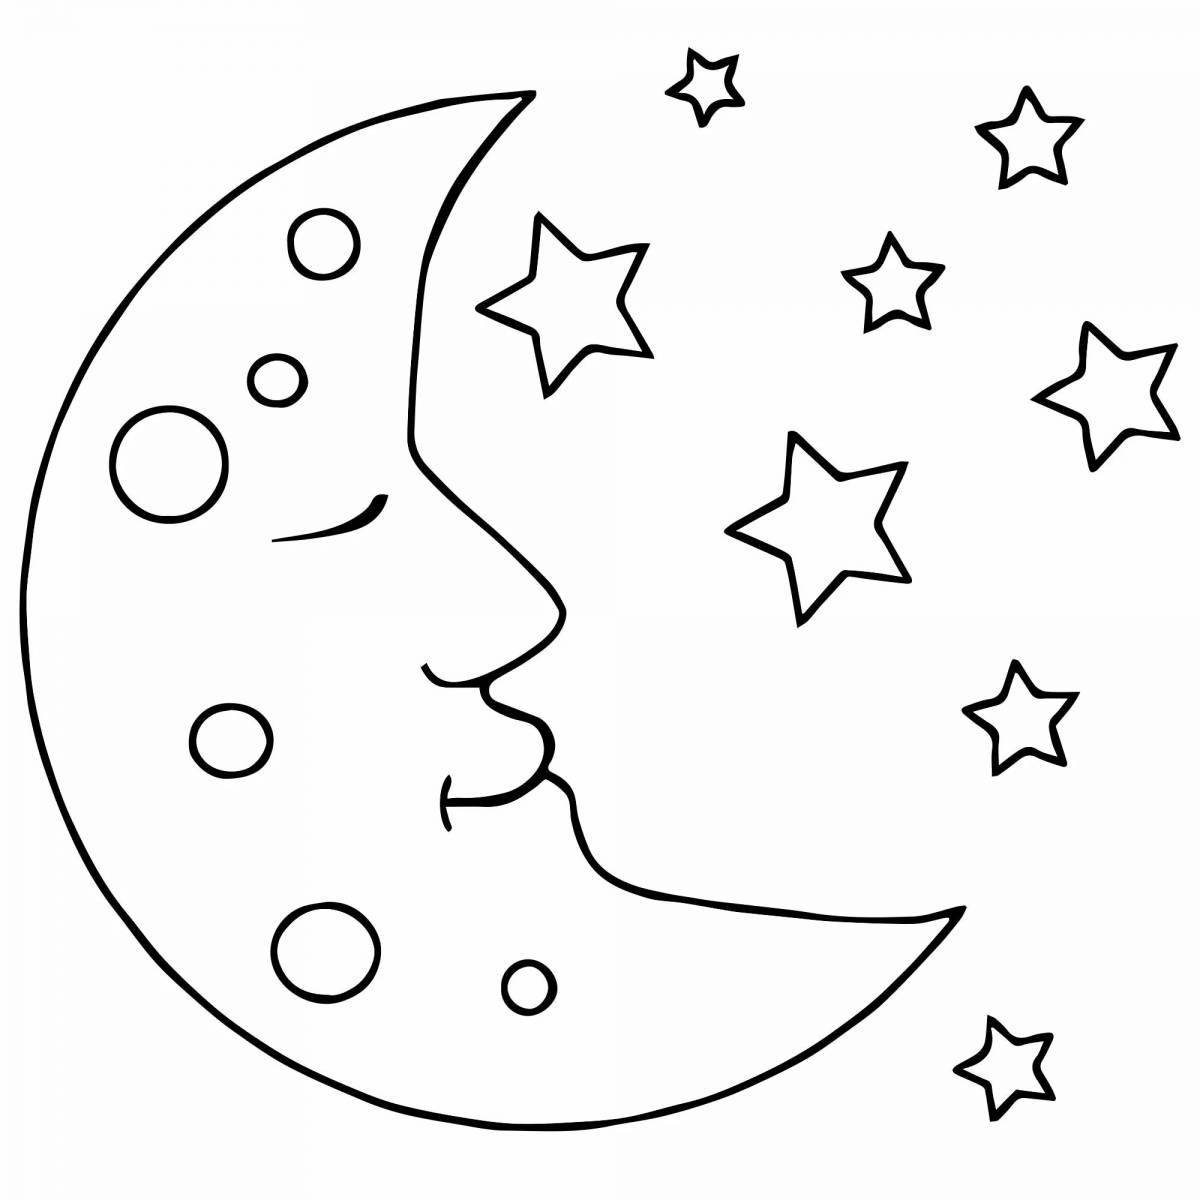 Children's night adorable coloring book